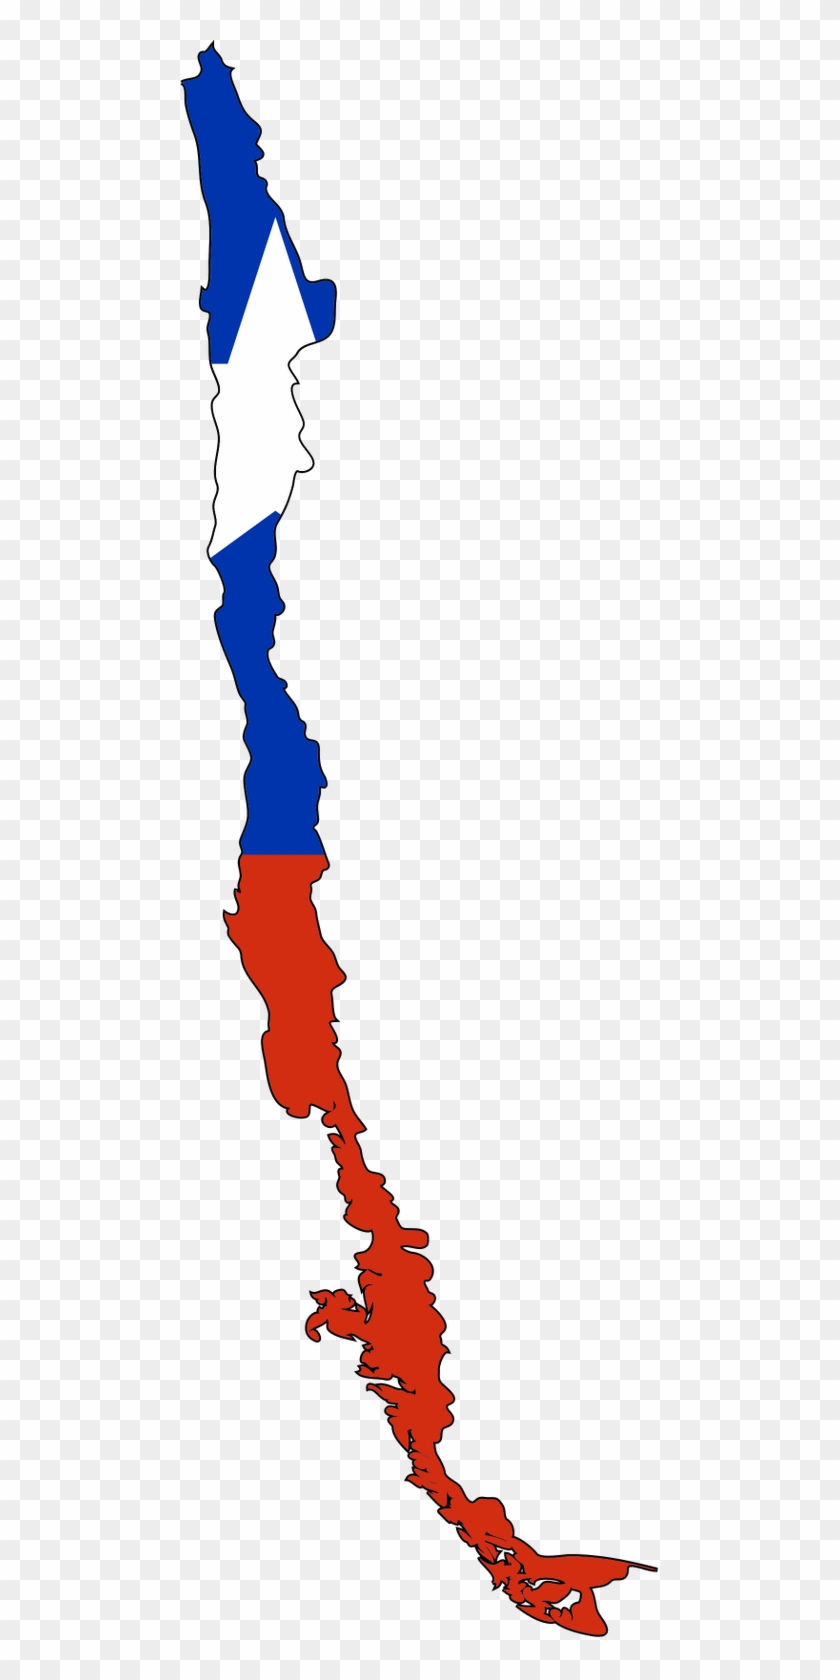 Chile Flag Clipart Hd - Chile Flag Map #1424808